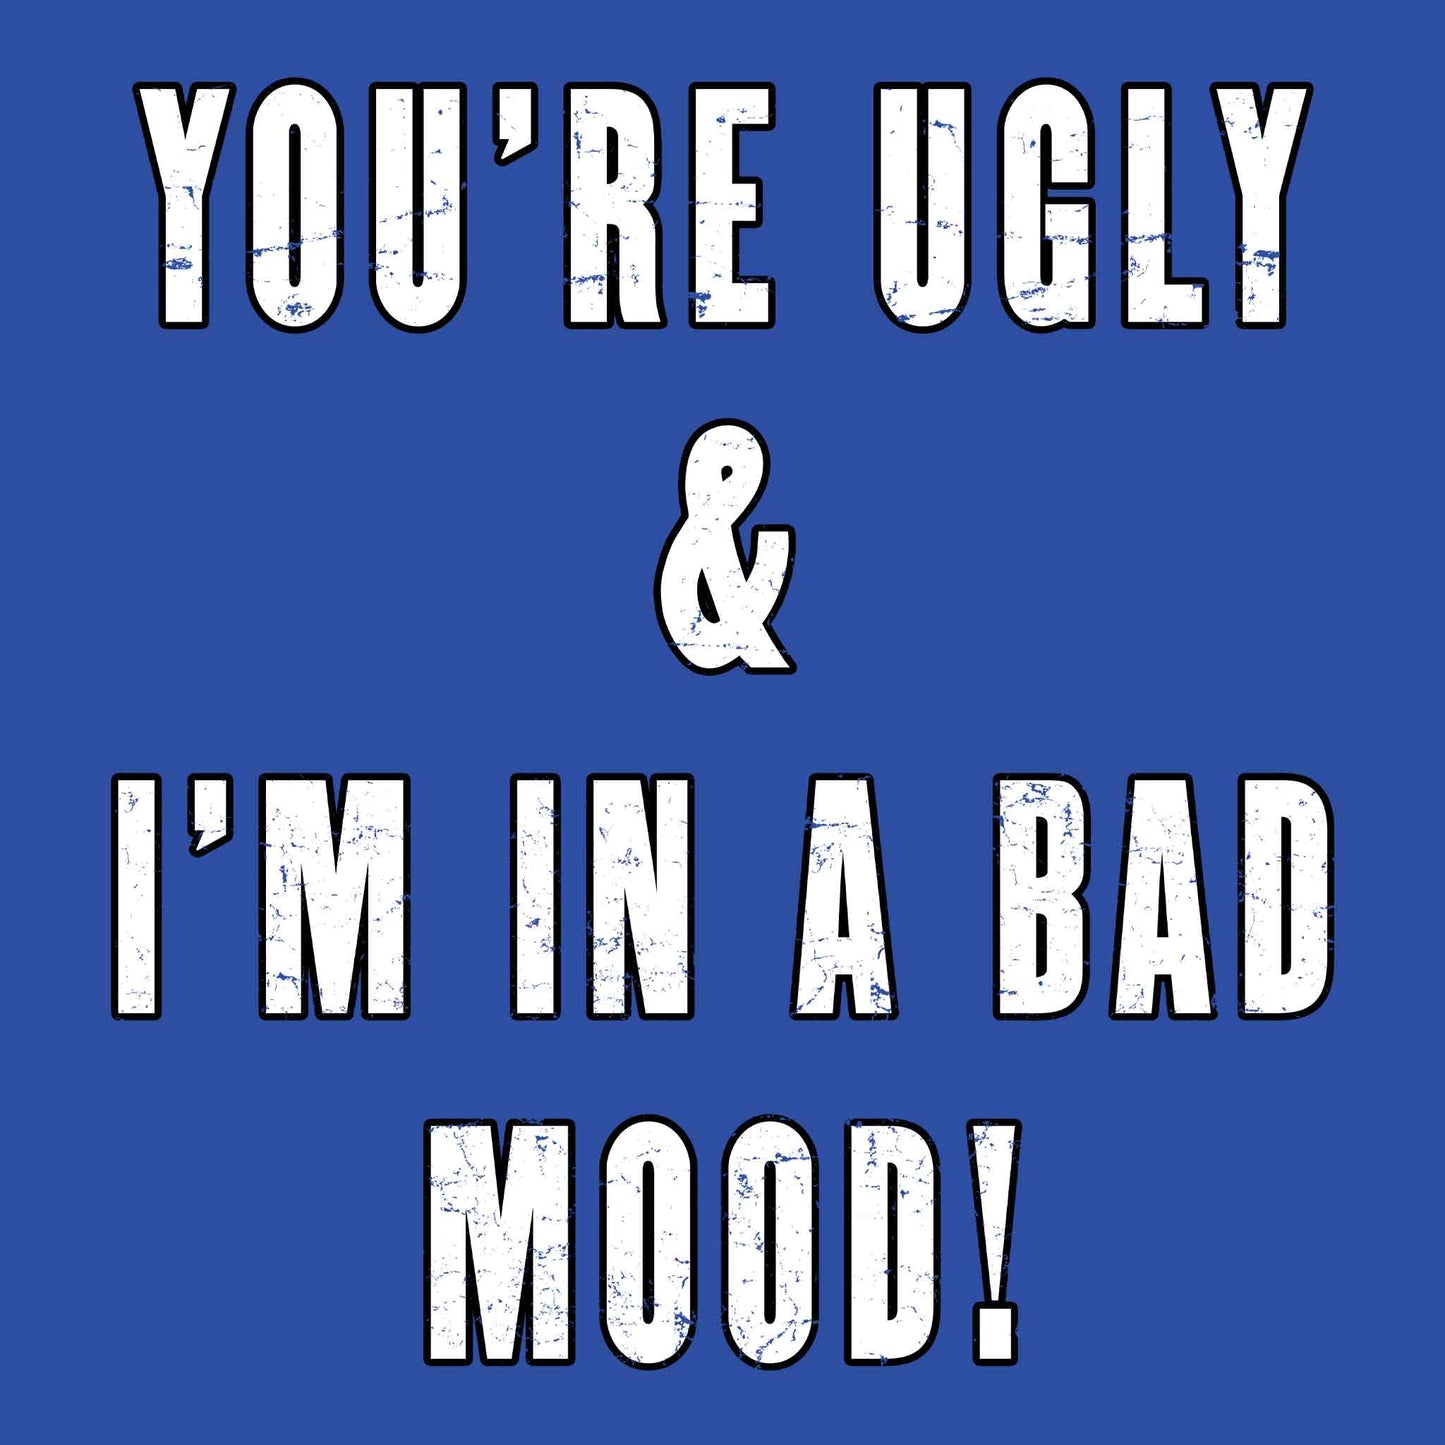 You're Ugly And I'm In A Bad Mood T-Shirt